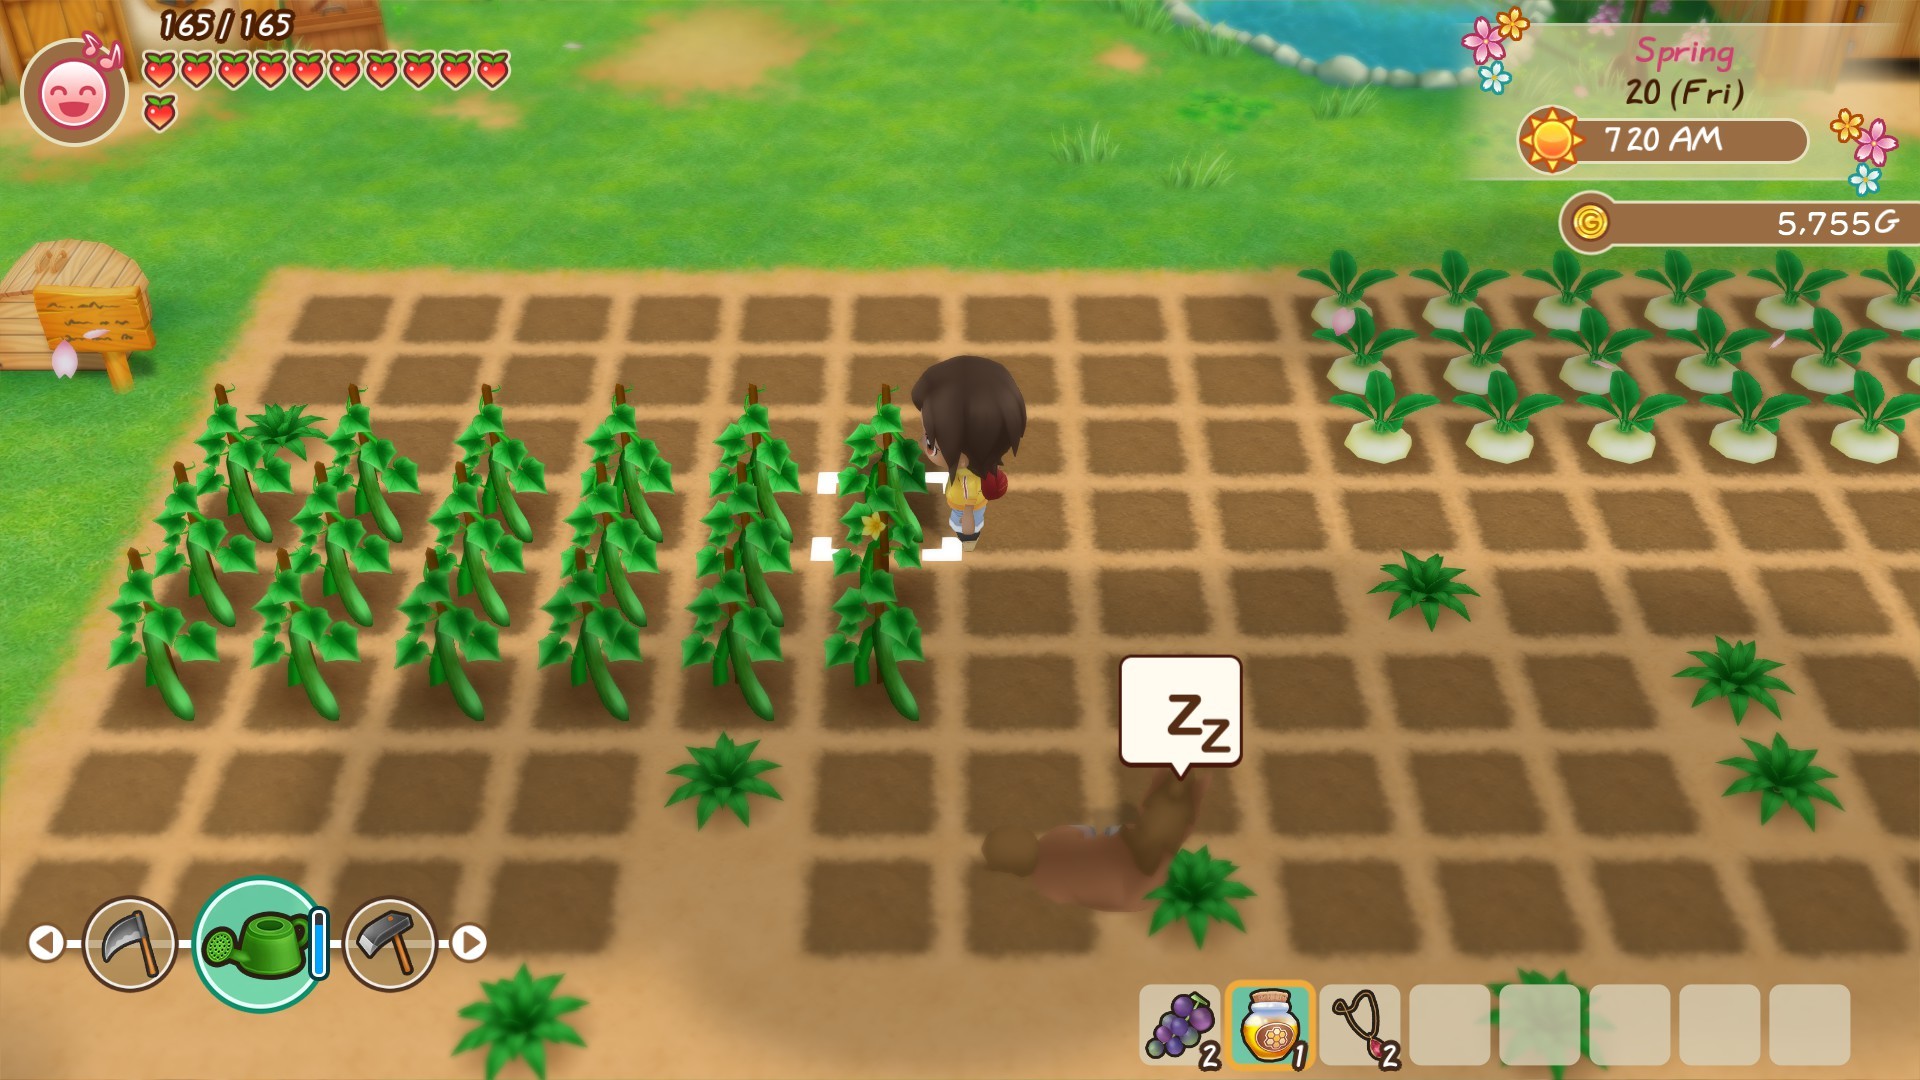 The farming field in Friends of Mineral Town